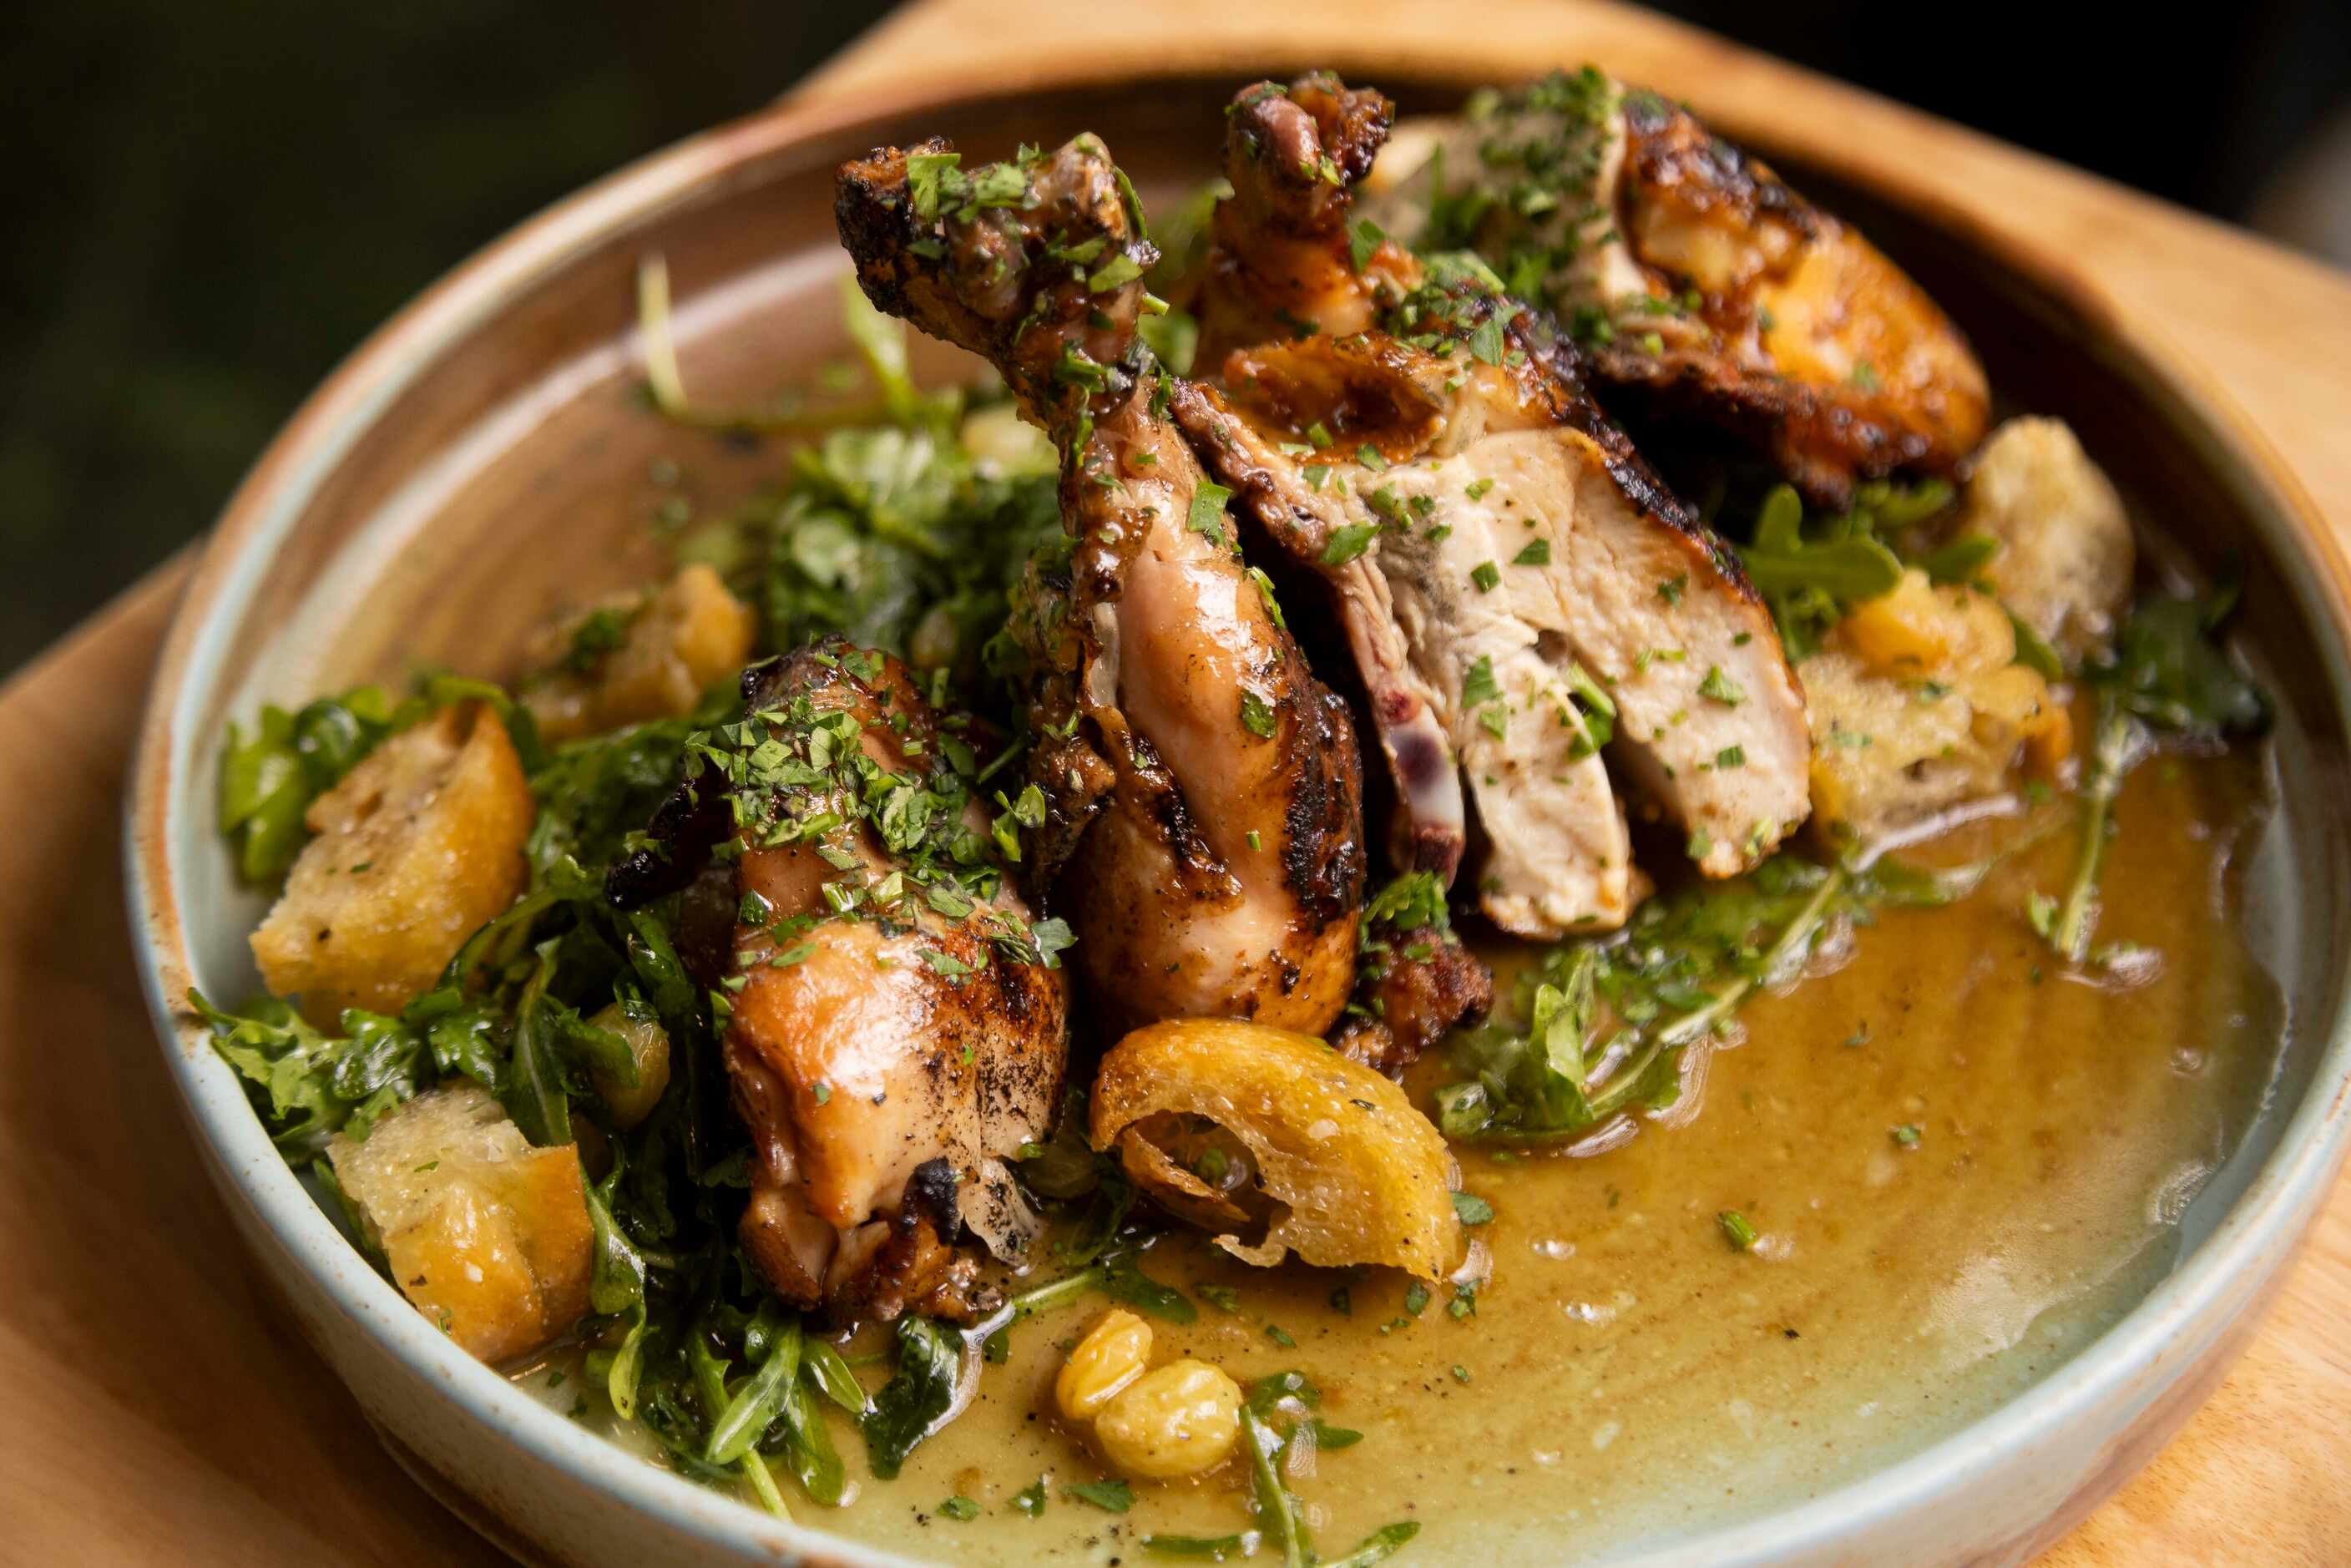 The Pollo alla Griglia is wood-fired and served with a warm bread salad made with toasted...